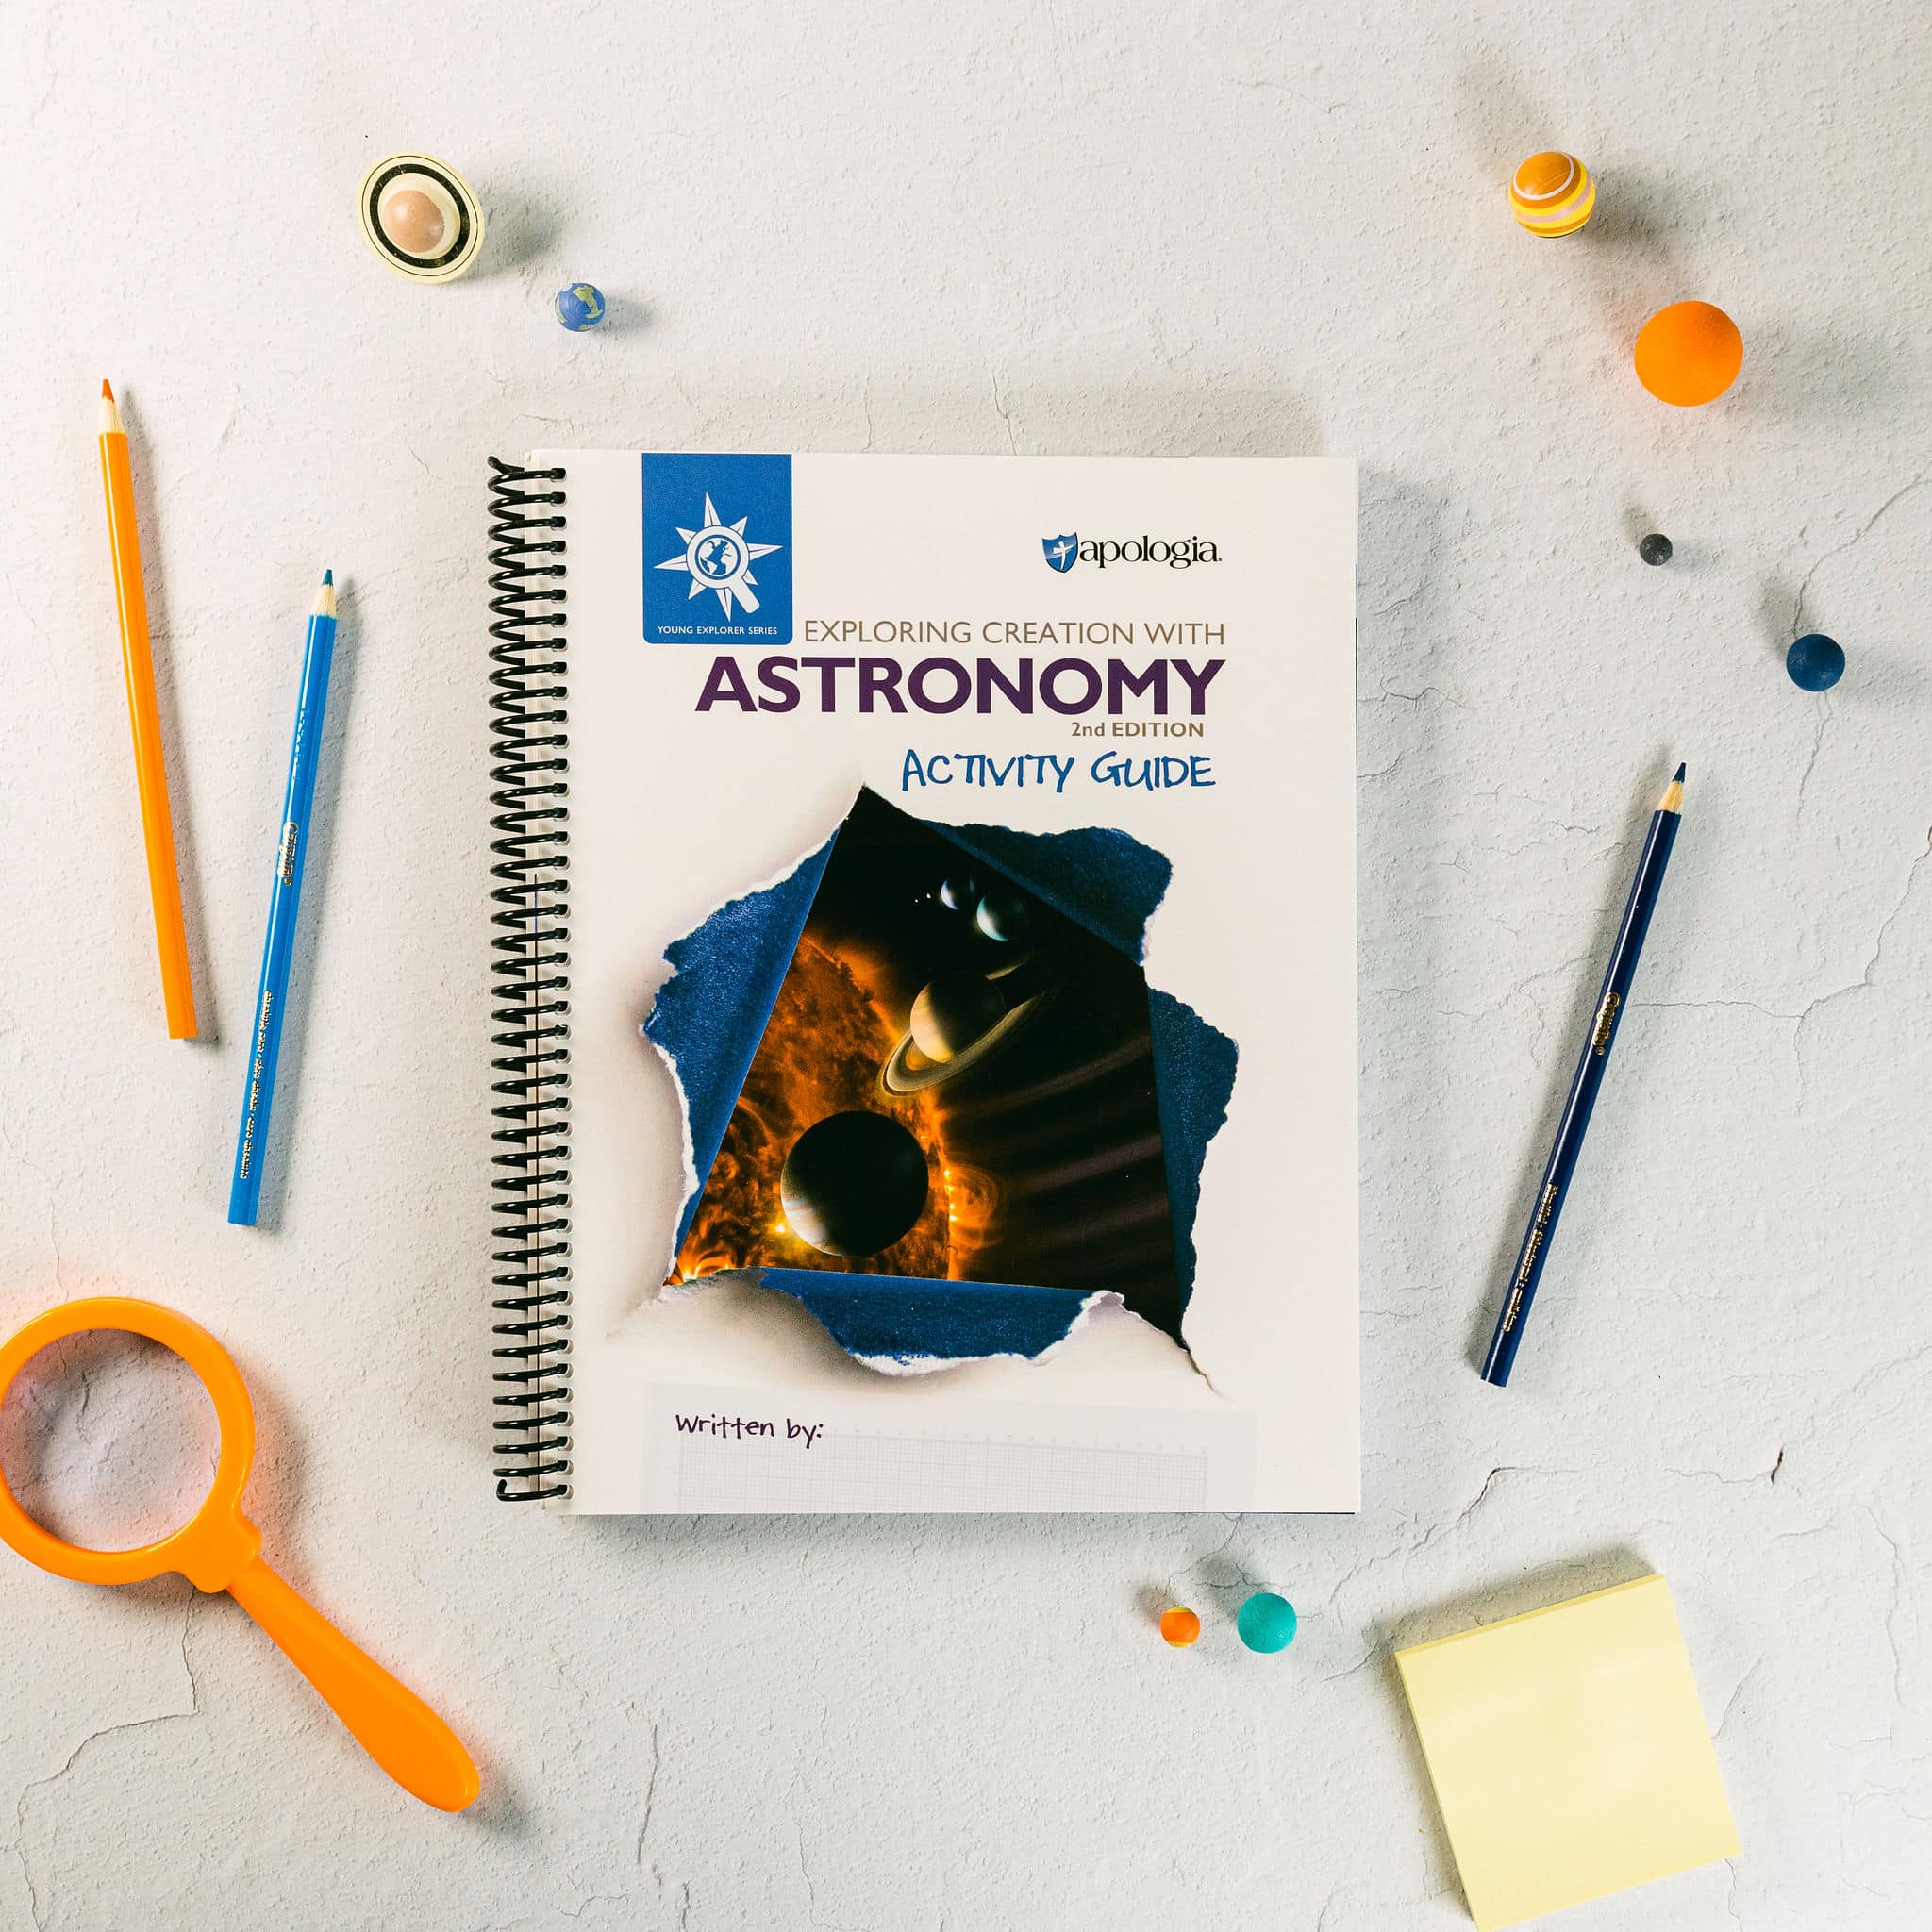 Astronomy Science Kit Activity Guide – Free with Purchase of Astronomy Set